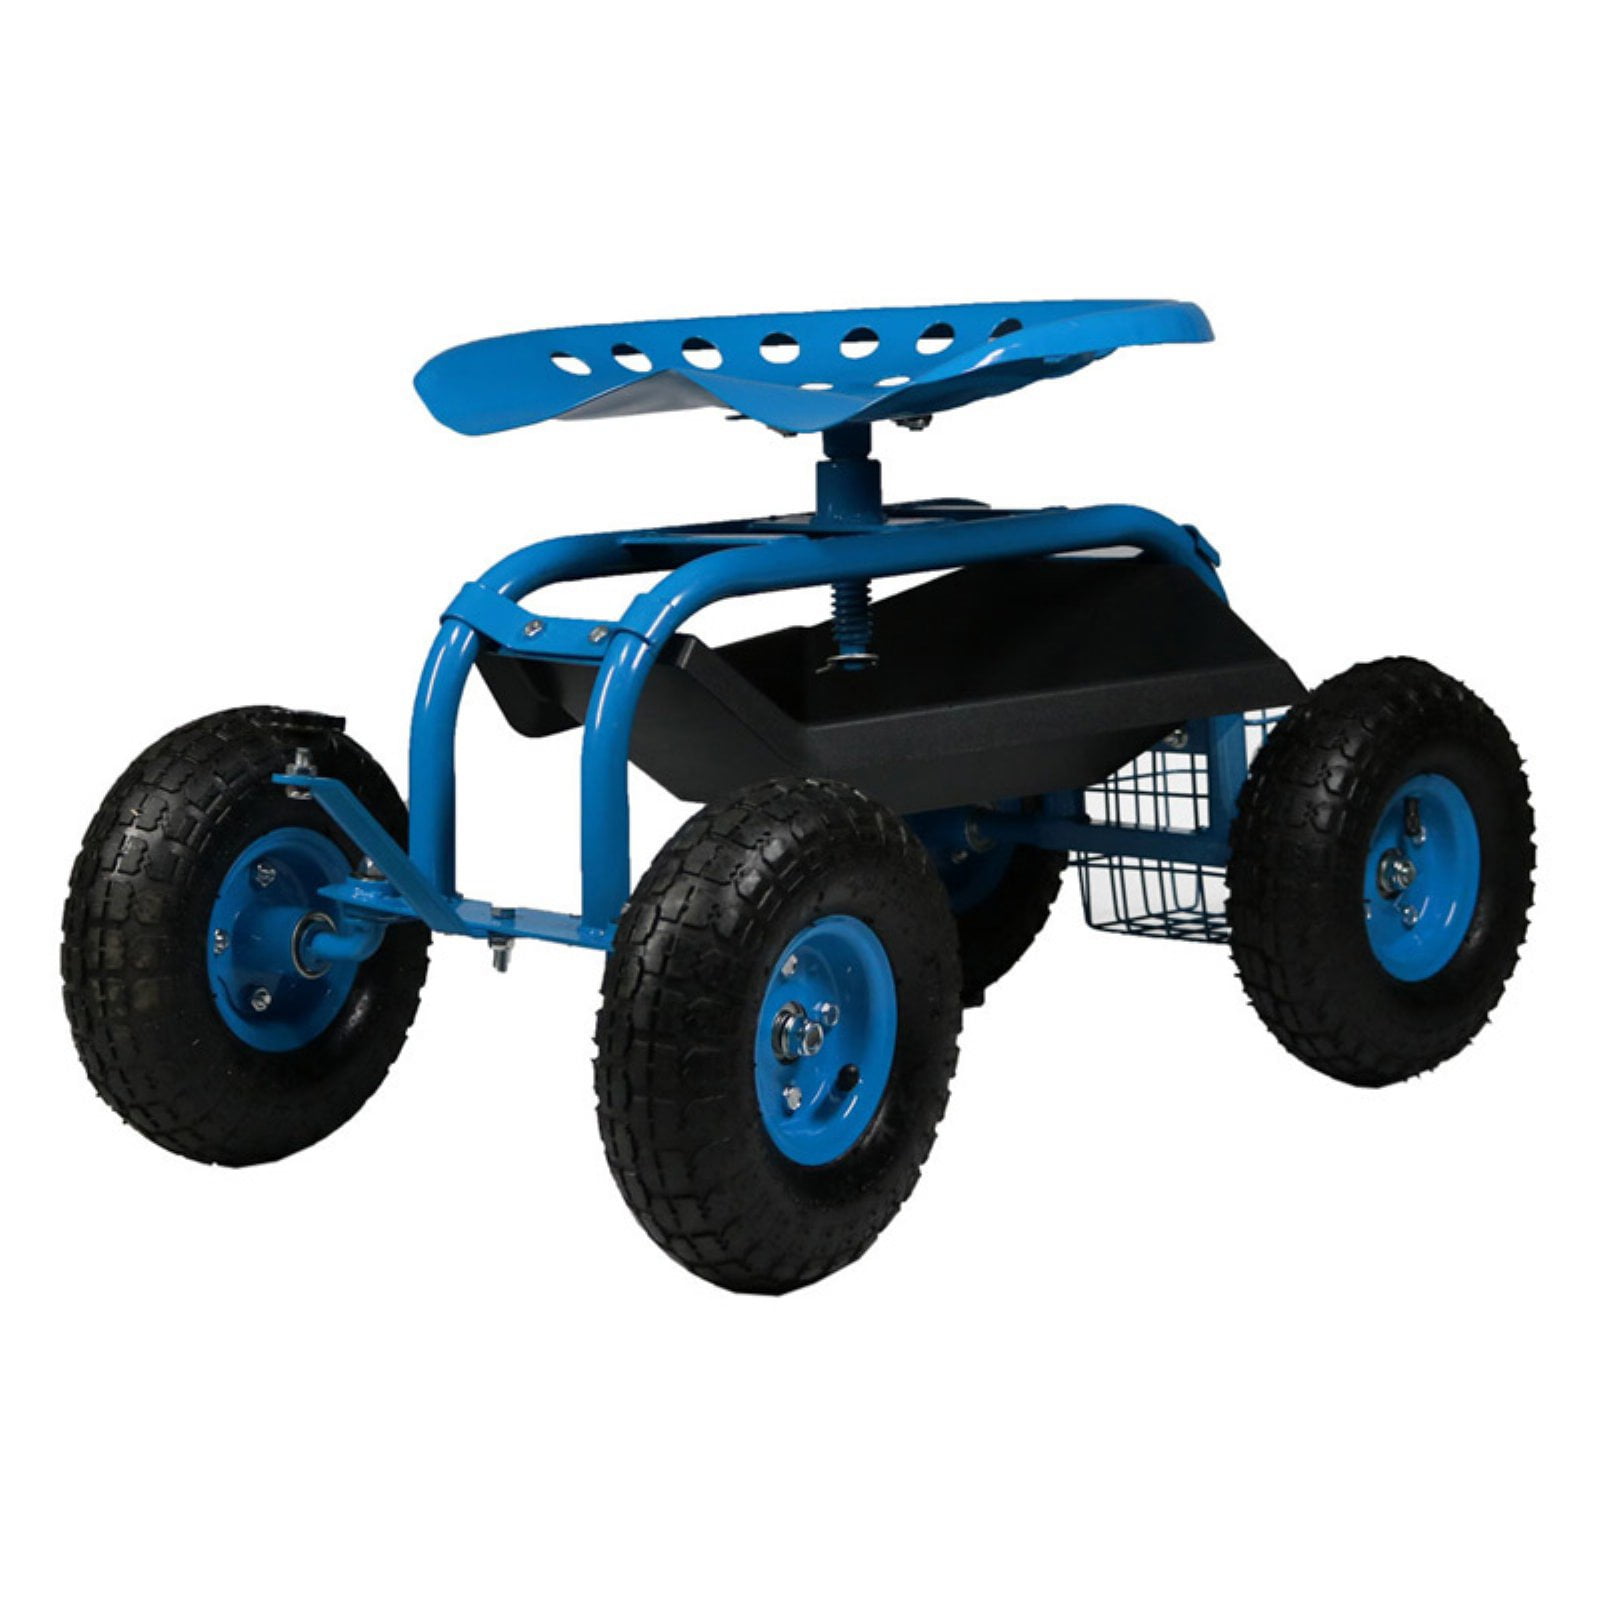 Swivel Seat & Utility Basket Sunnydaze Garden Cart Rolling Scooter with Extendable Steering Handle Blue 